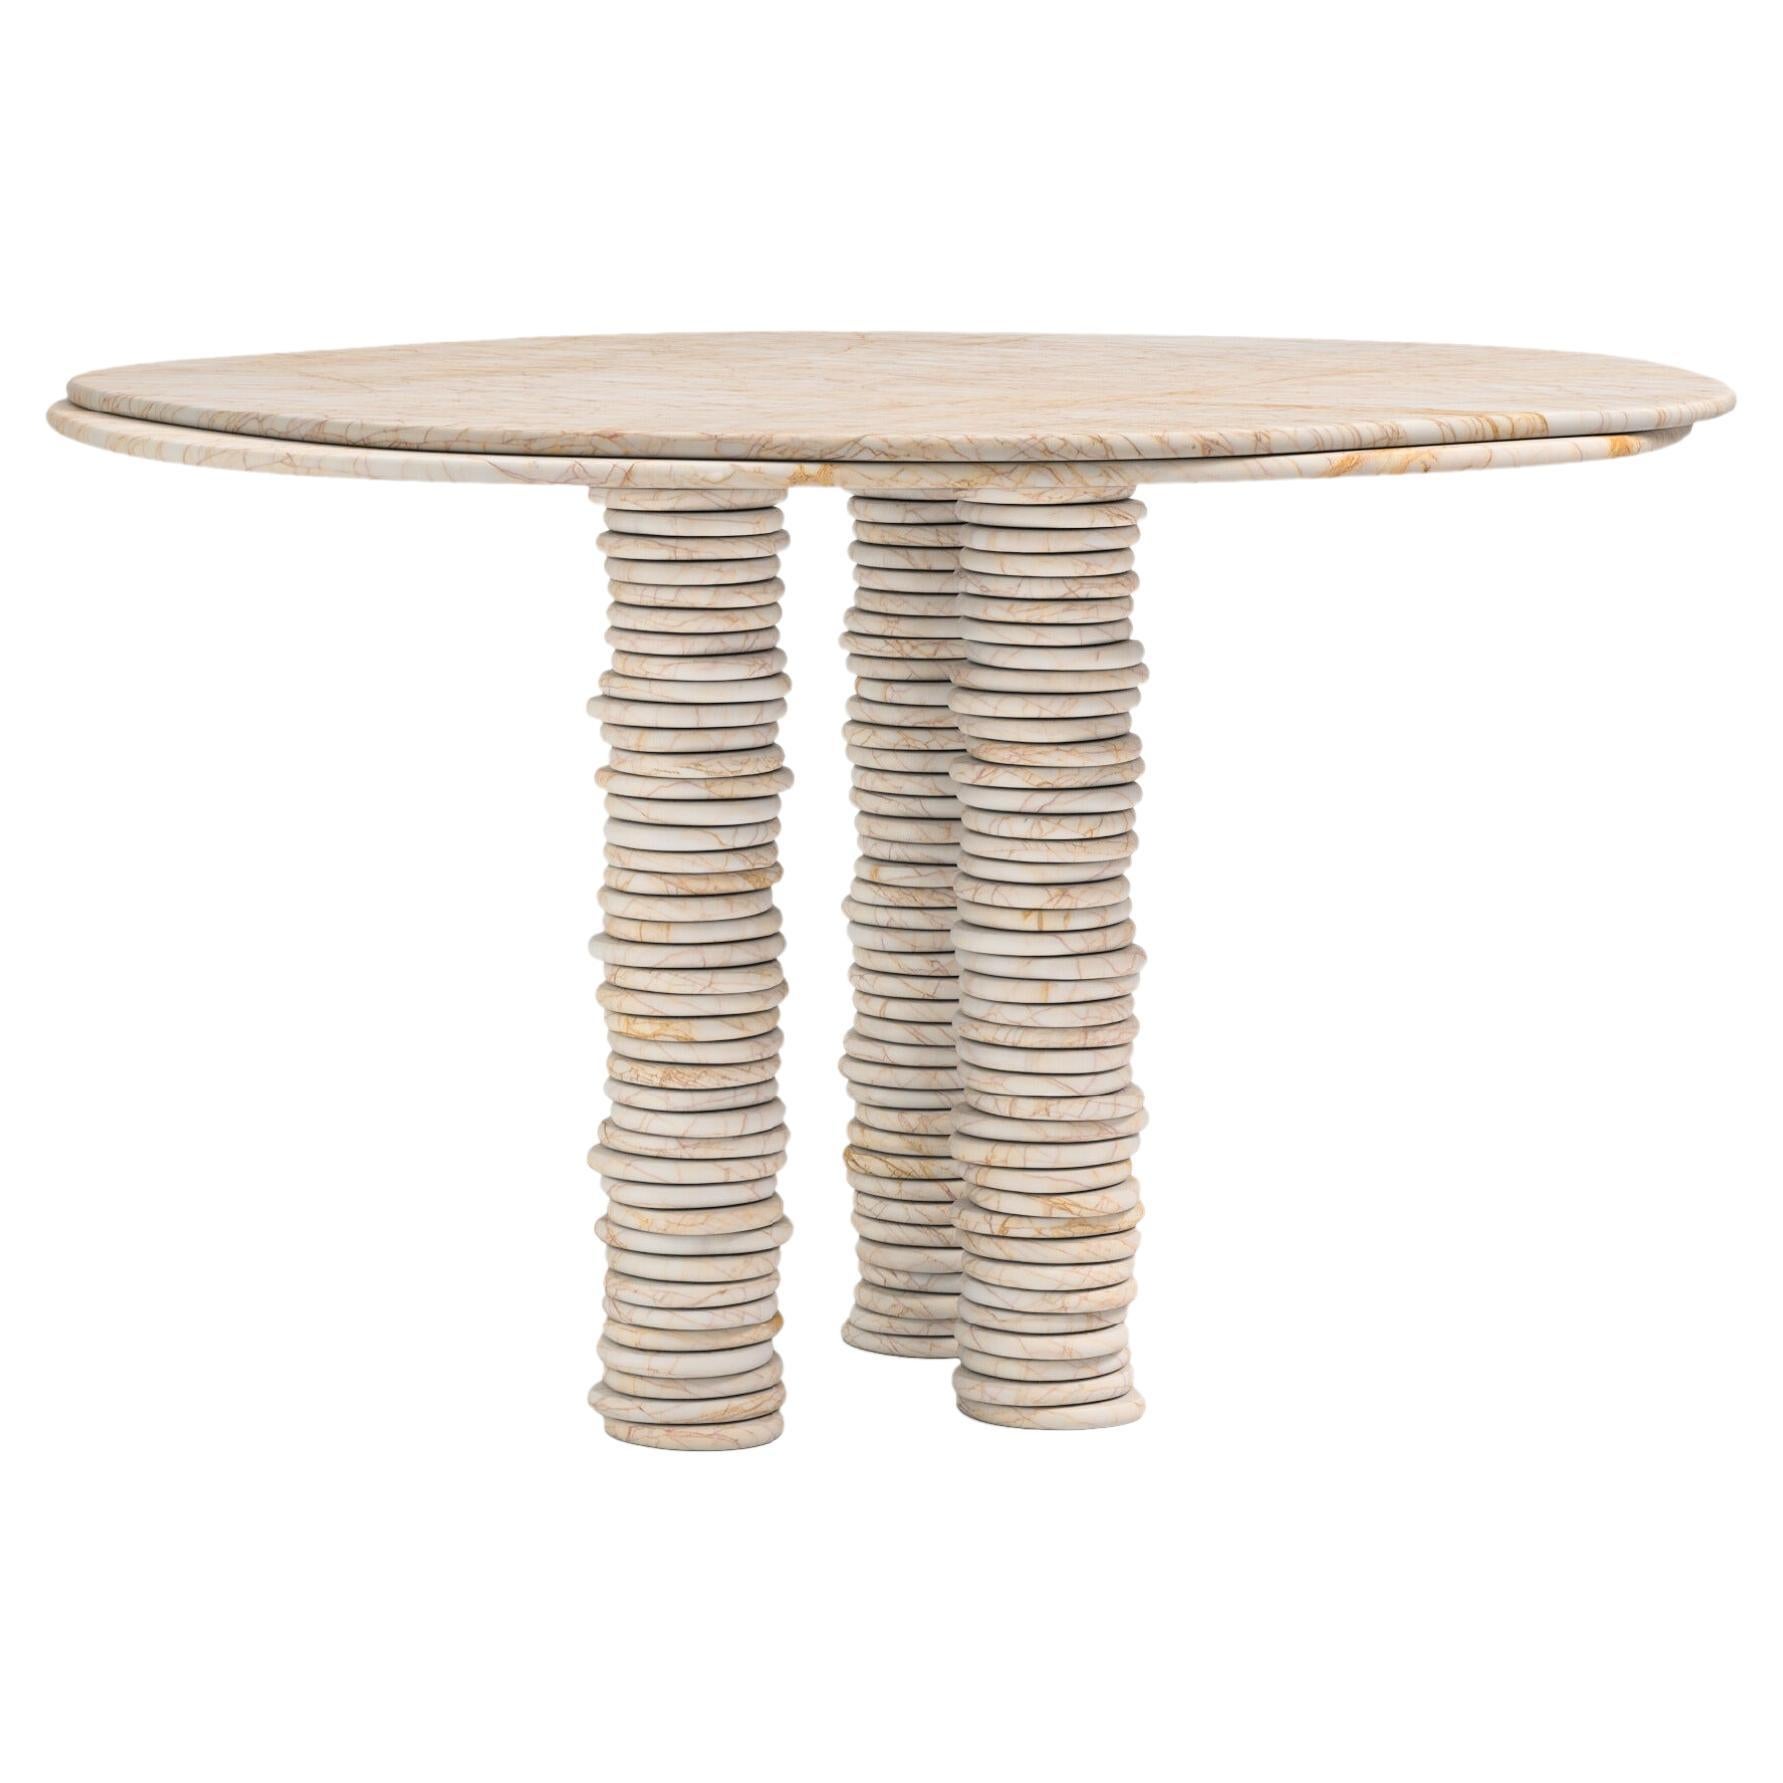 FORM(LA) Onda Round Dining Table 60”L x 60”W x 29”H Golden Spider Marble For Sale